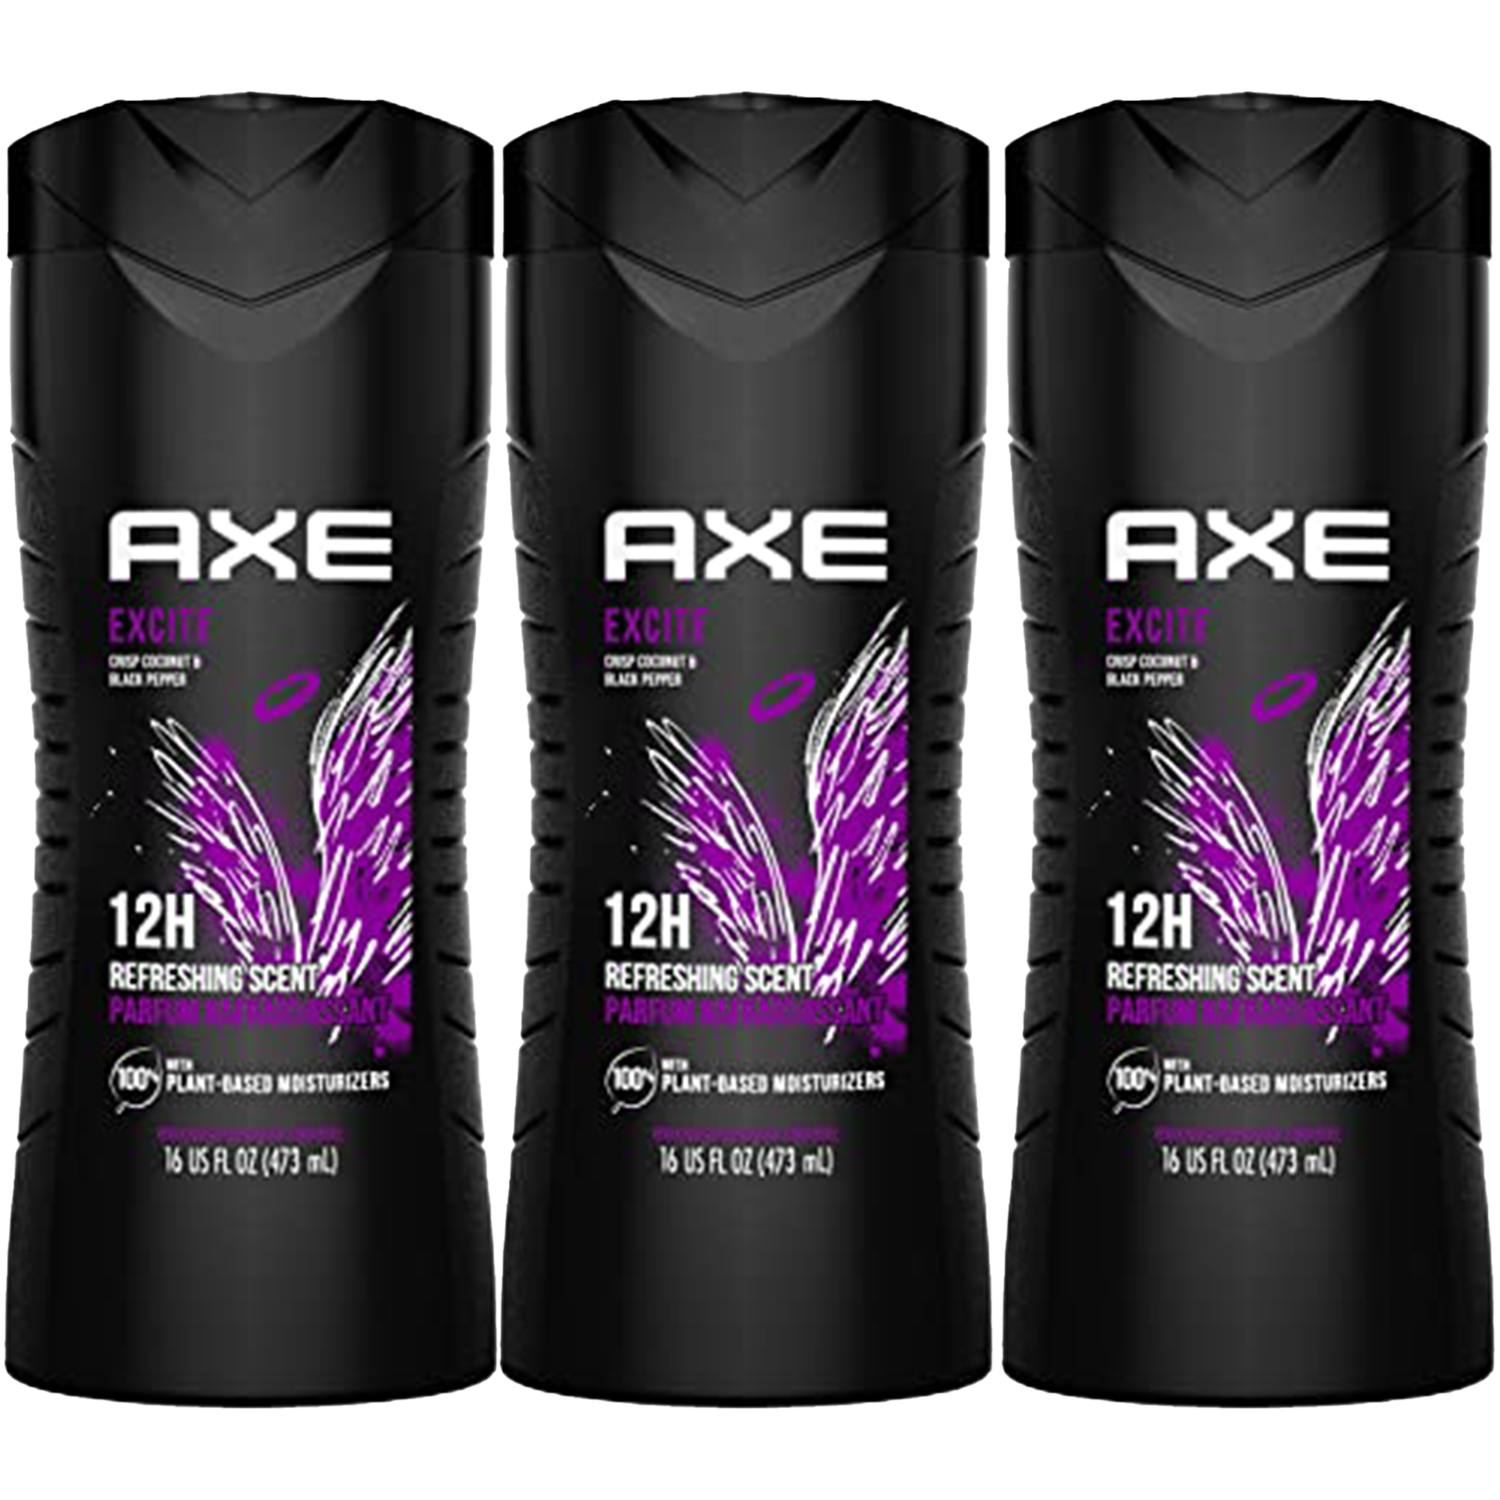 3-New AXE Body Wash 12h Refreshing Scent Excite Crisp Coconut & Black Pepper wit